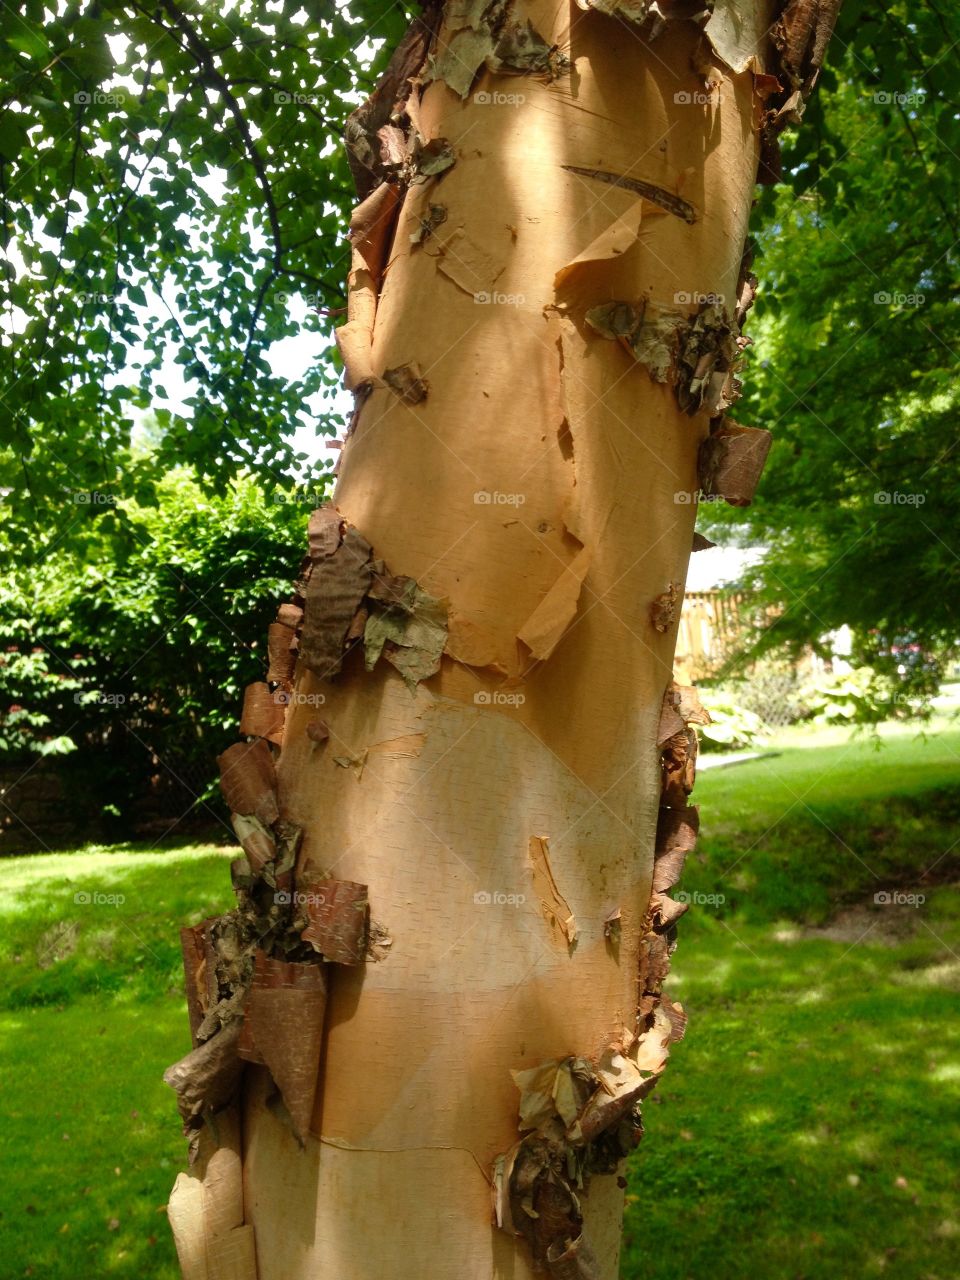 The Colors of Birch Bark